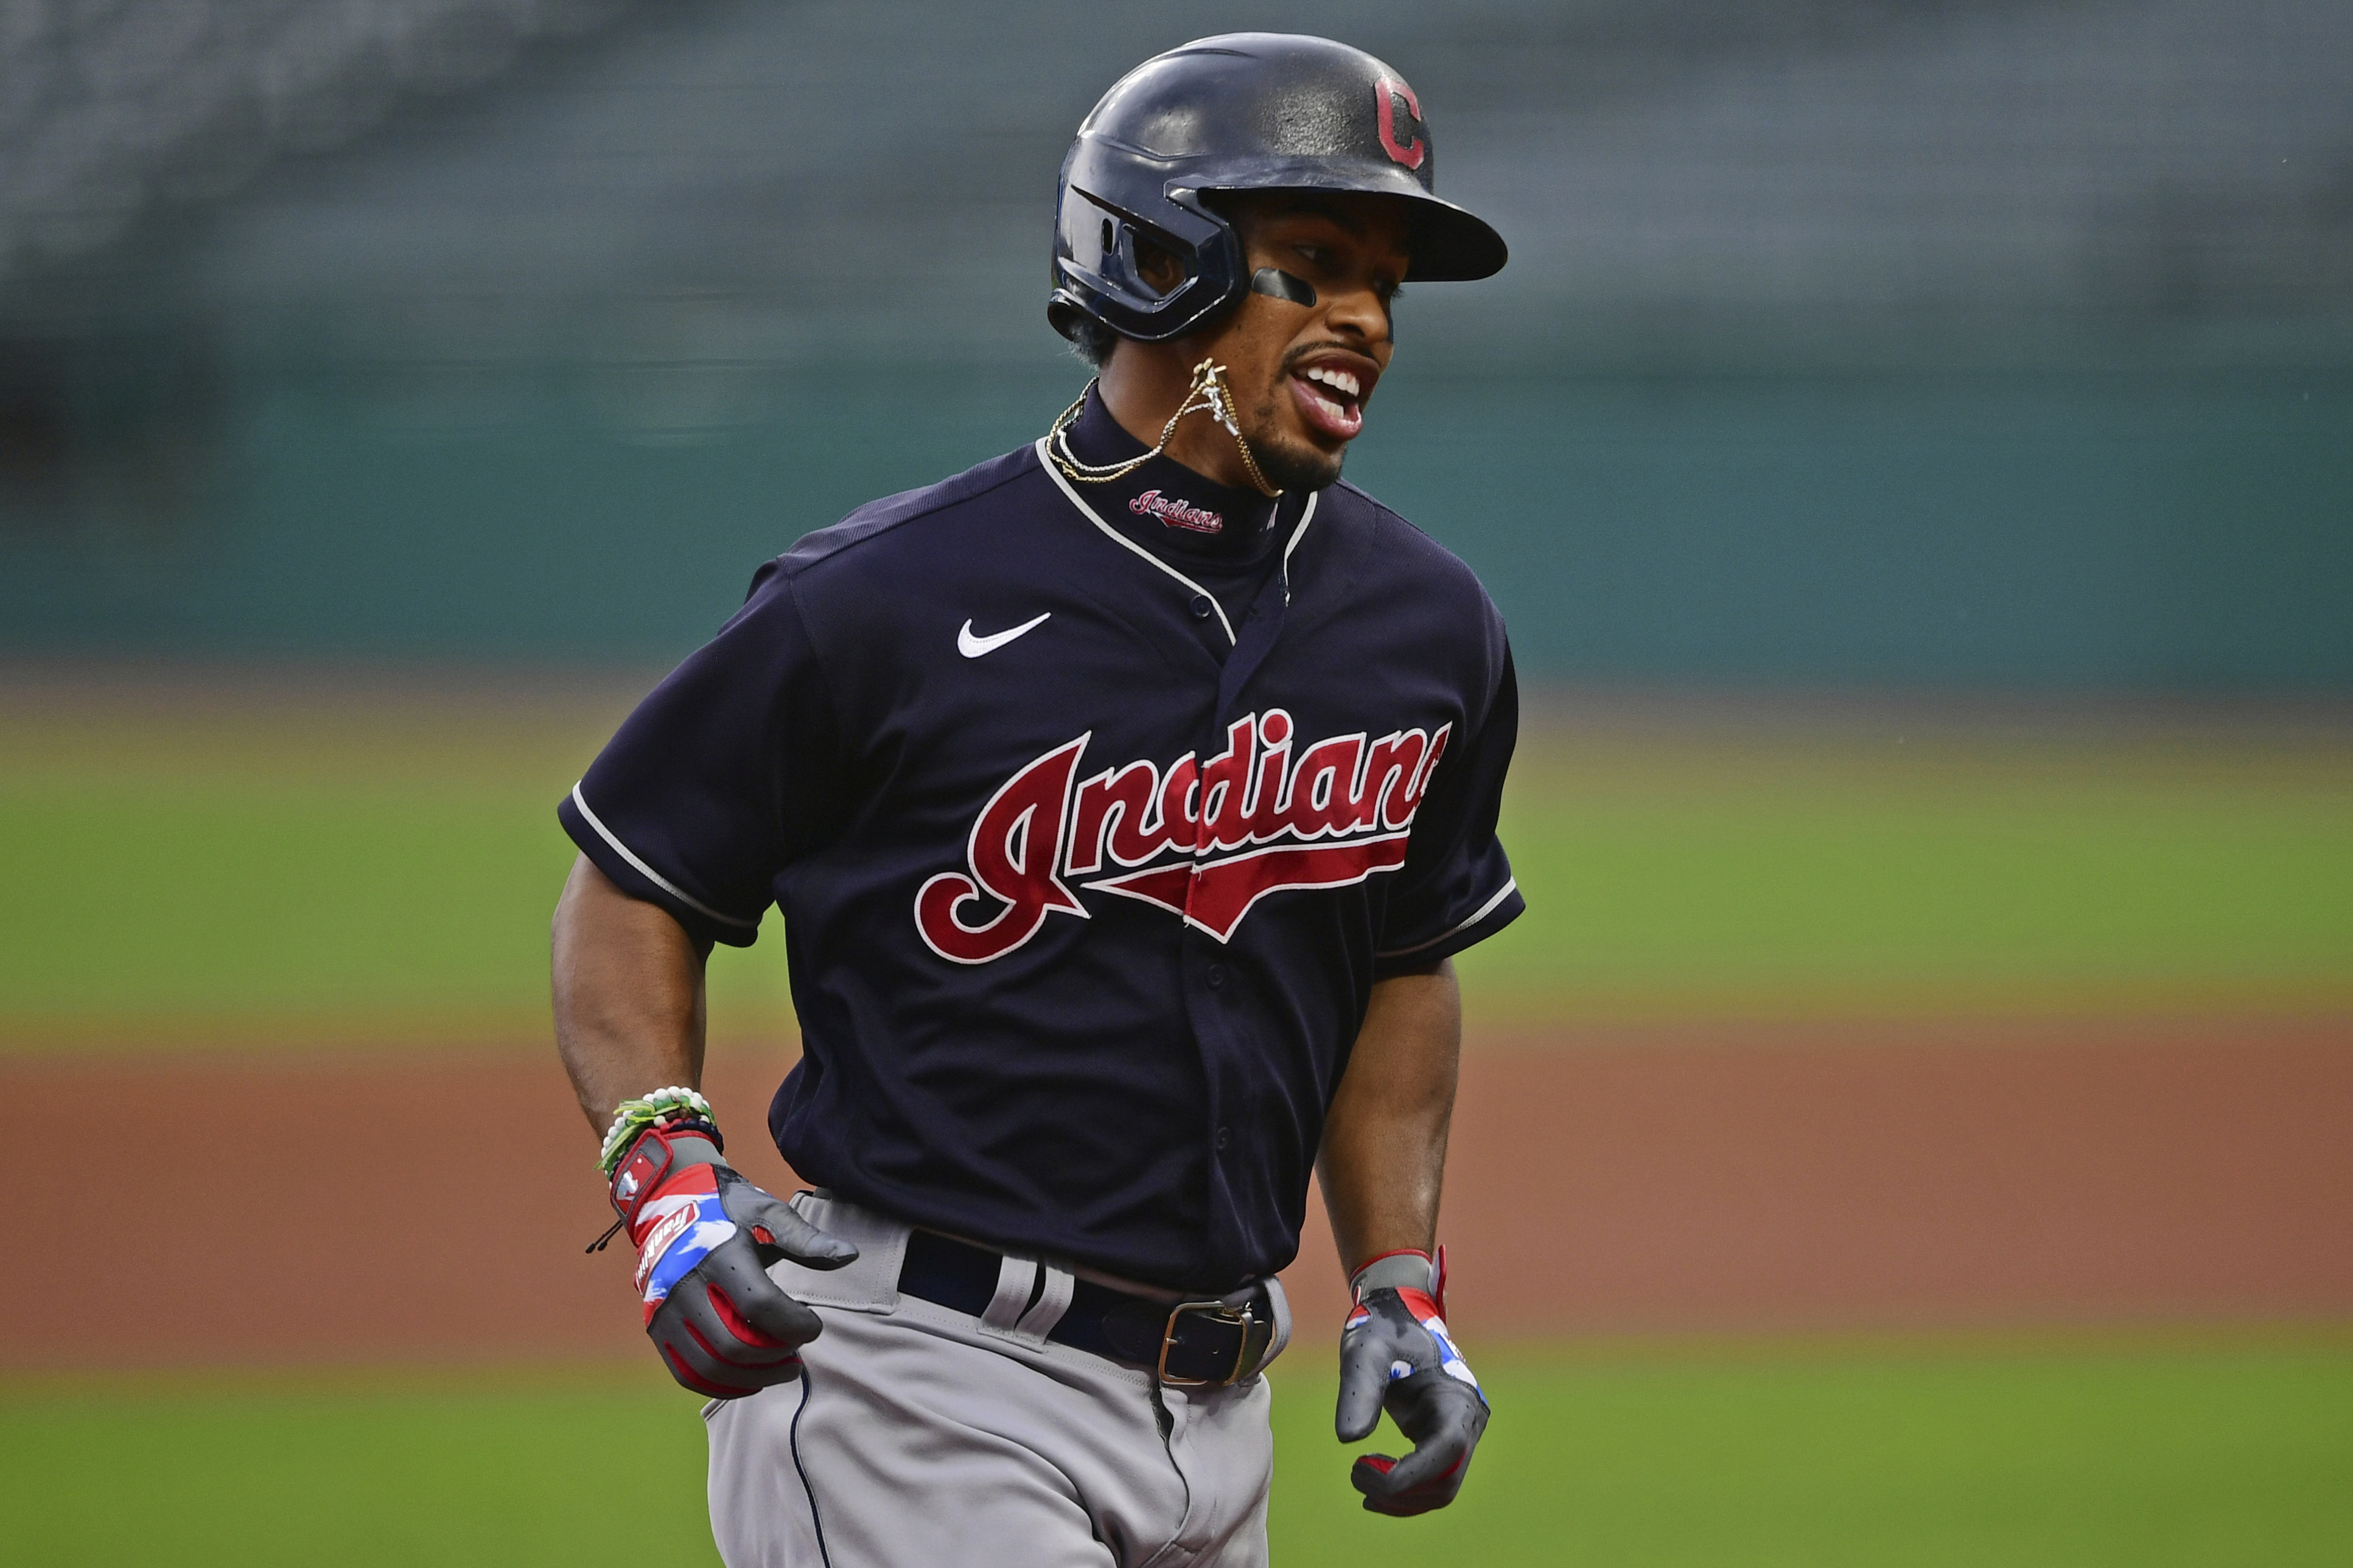 Cleveland Indians Selling 'Indians' Gear While Looking for Non-Racist Mascot